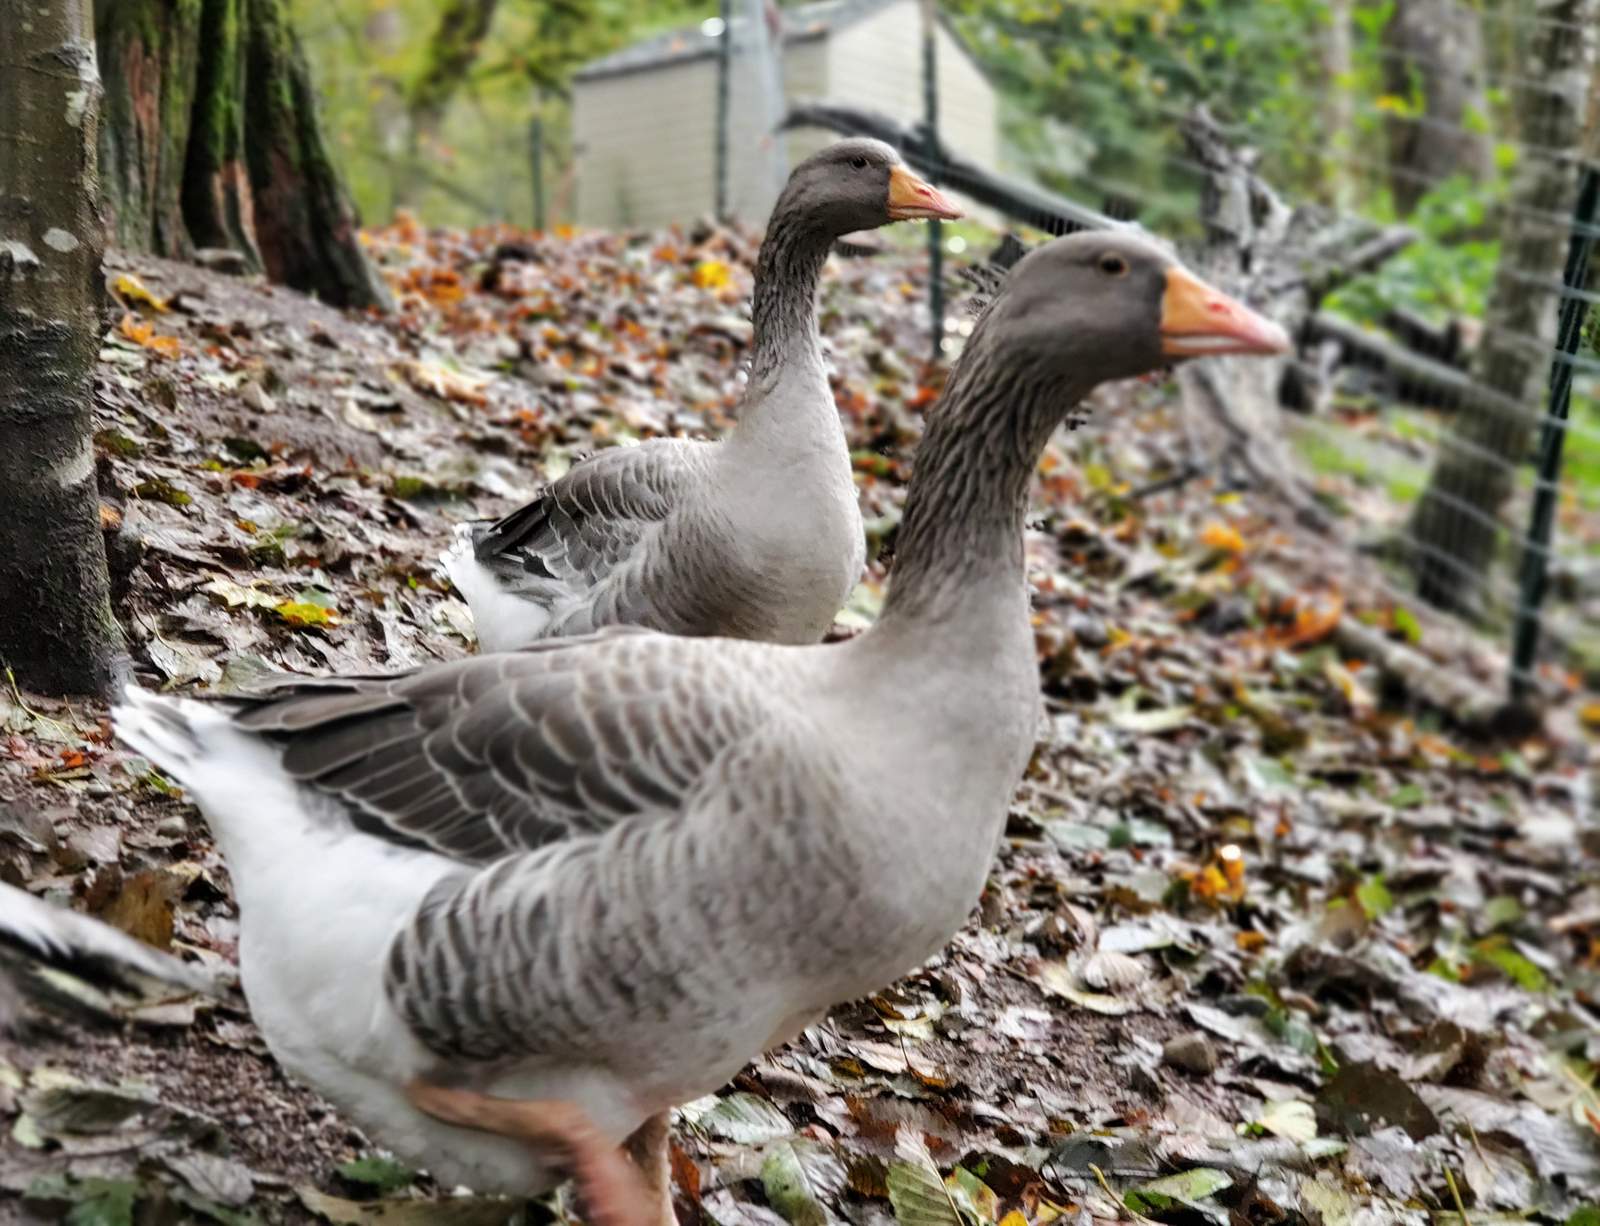 McMurray Hatchery Blog | Raising Geese for Meat on a Homestead